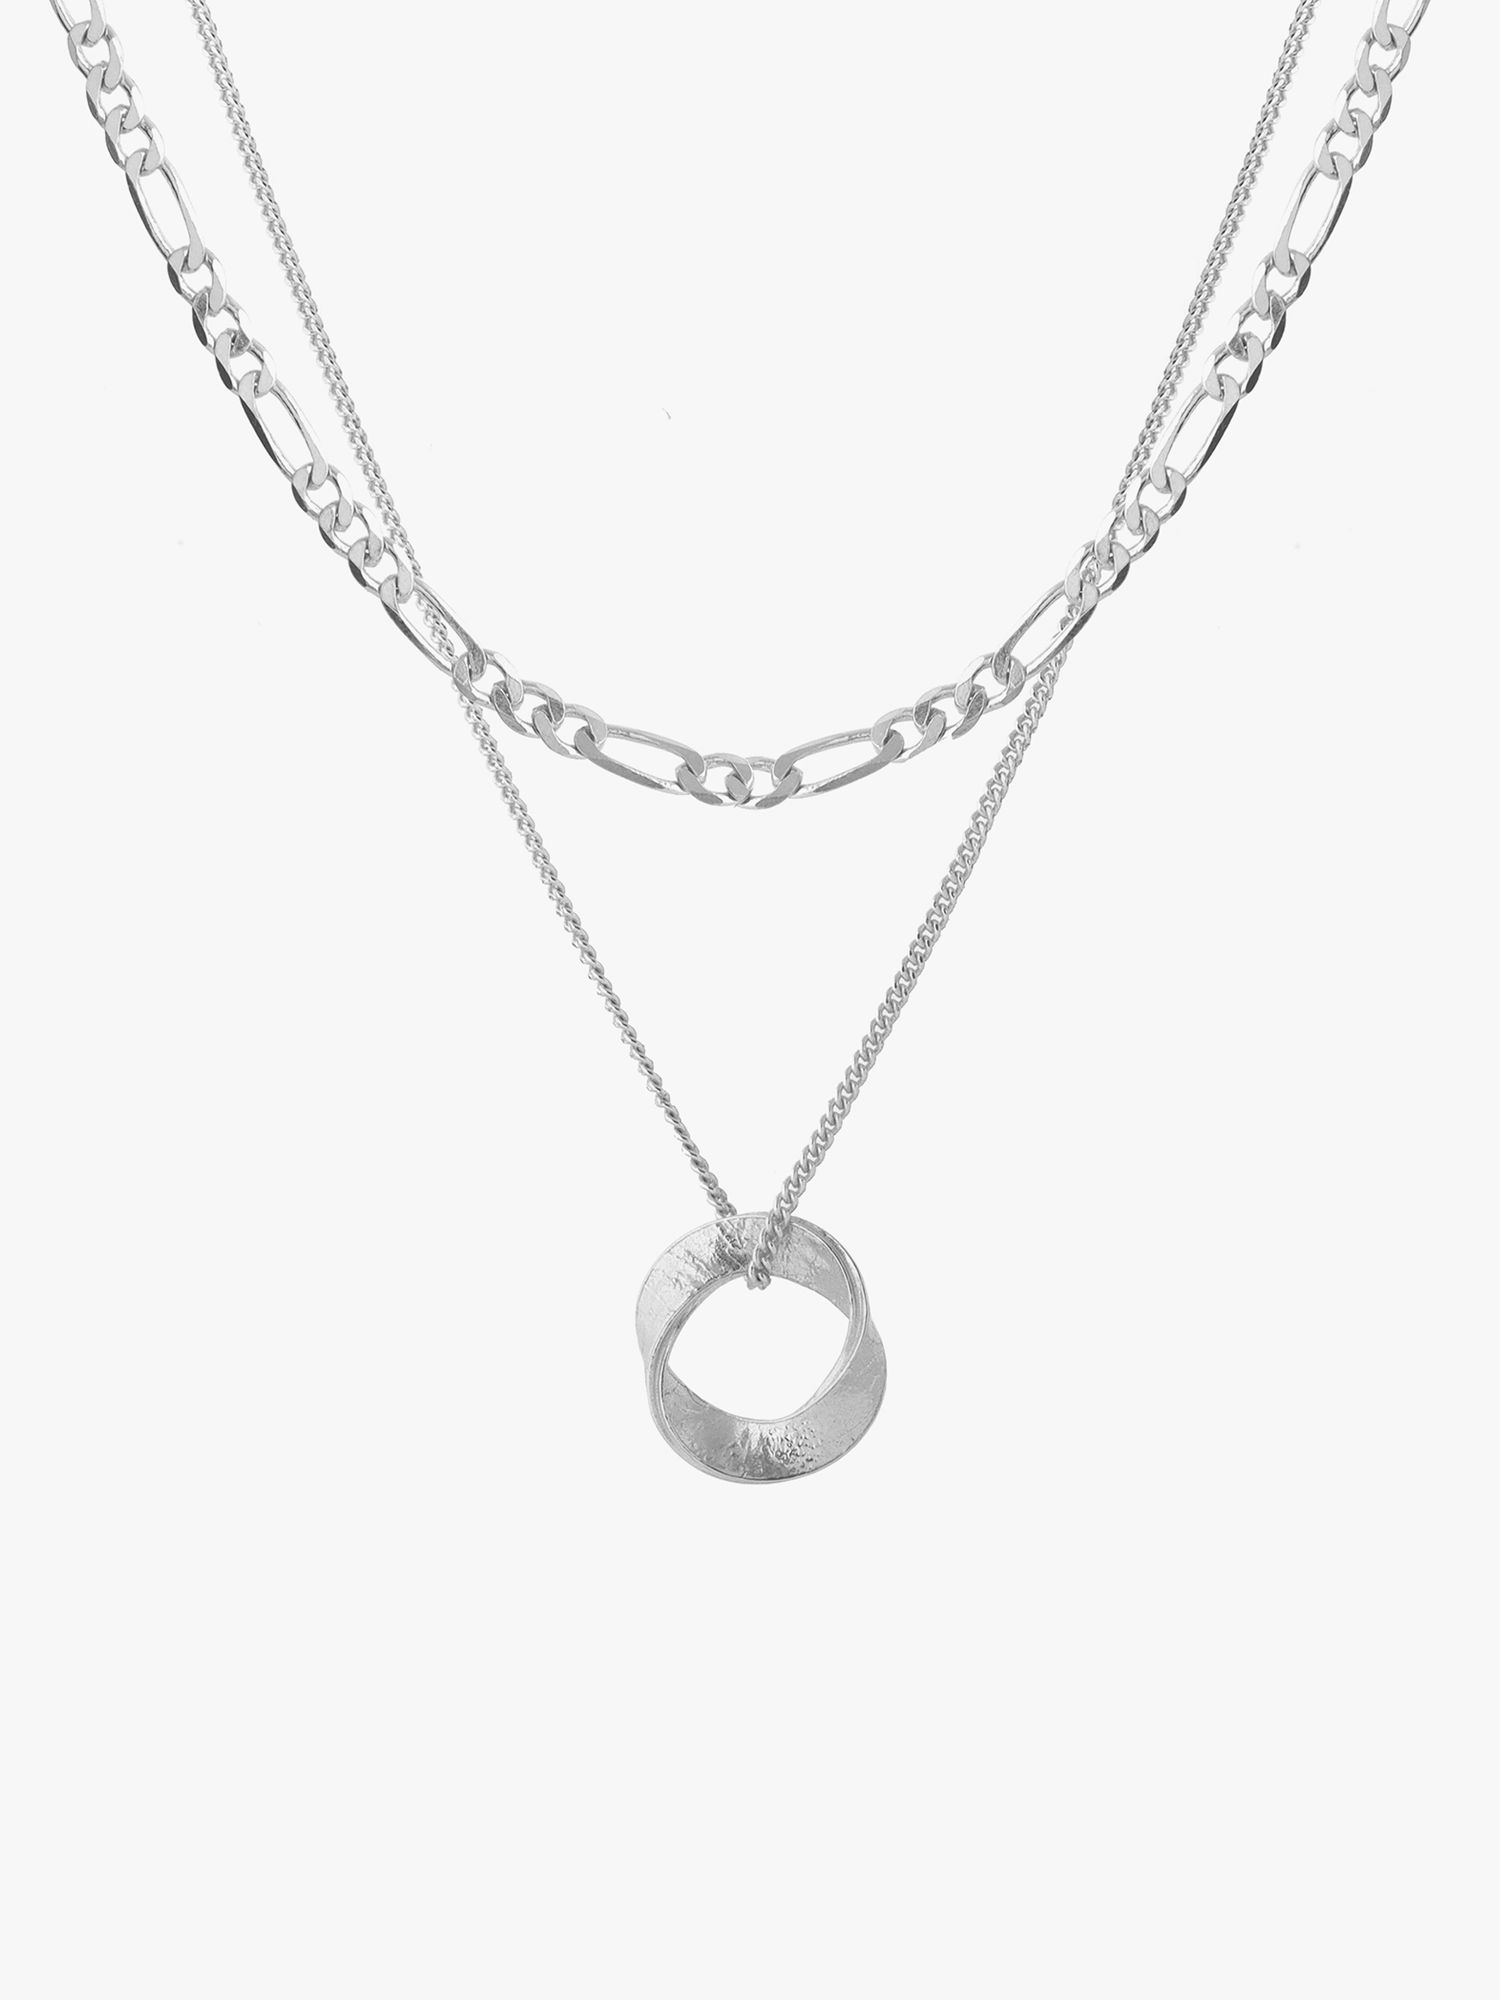 Tutti & Co Cypress Double Layer Pendant Necklace, Silver